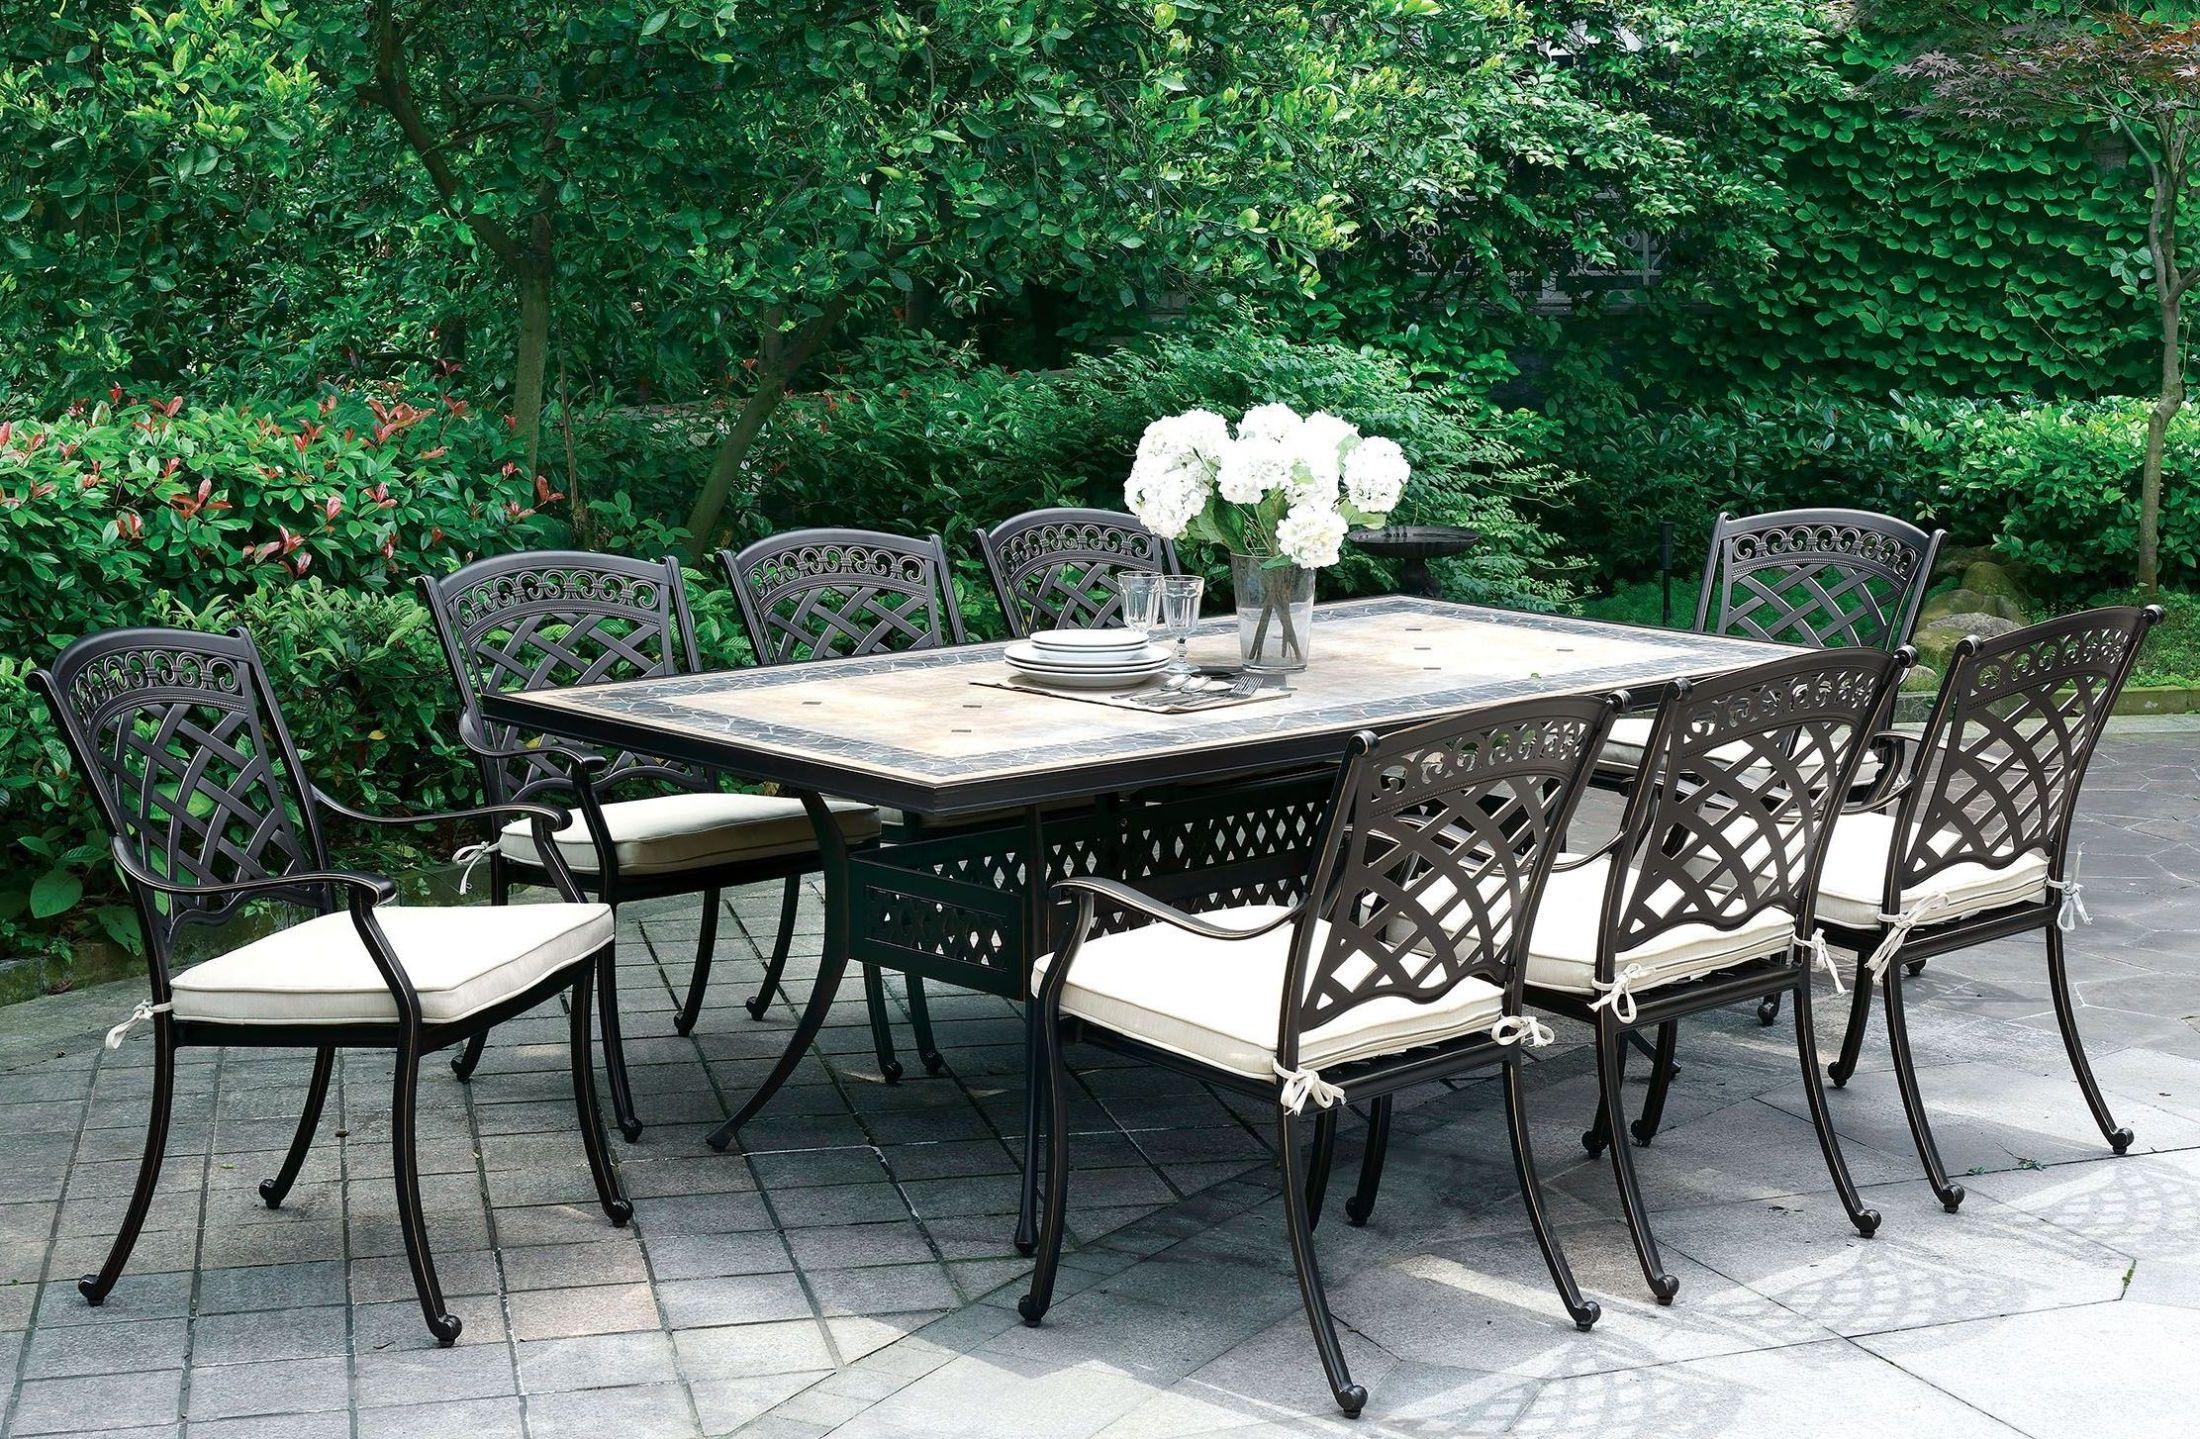 Black Outdoor Dining Modern Chairs Sets Intended For Most Current Charissa Antique Black Patio Dining Room Set From Furniture Of America (View 11 of 15)